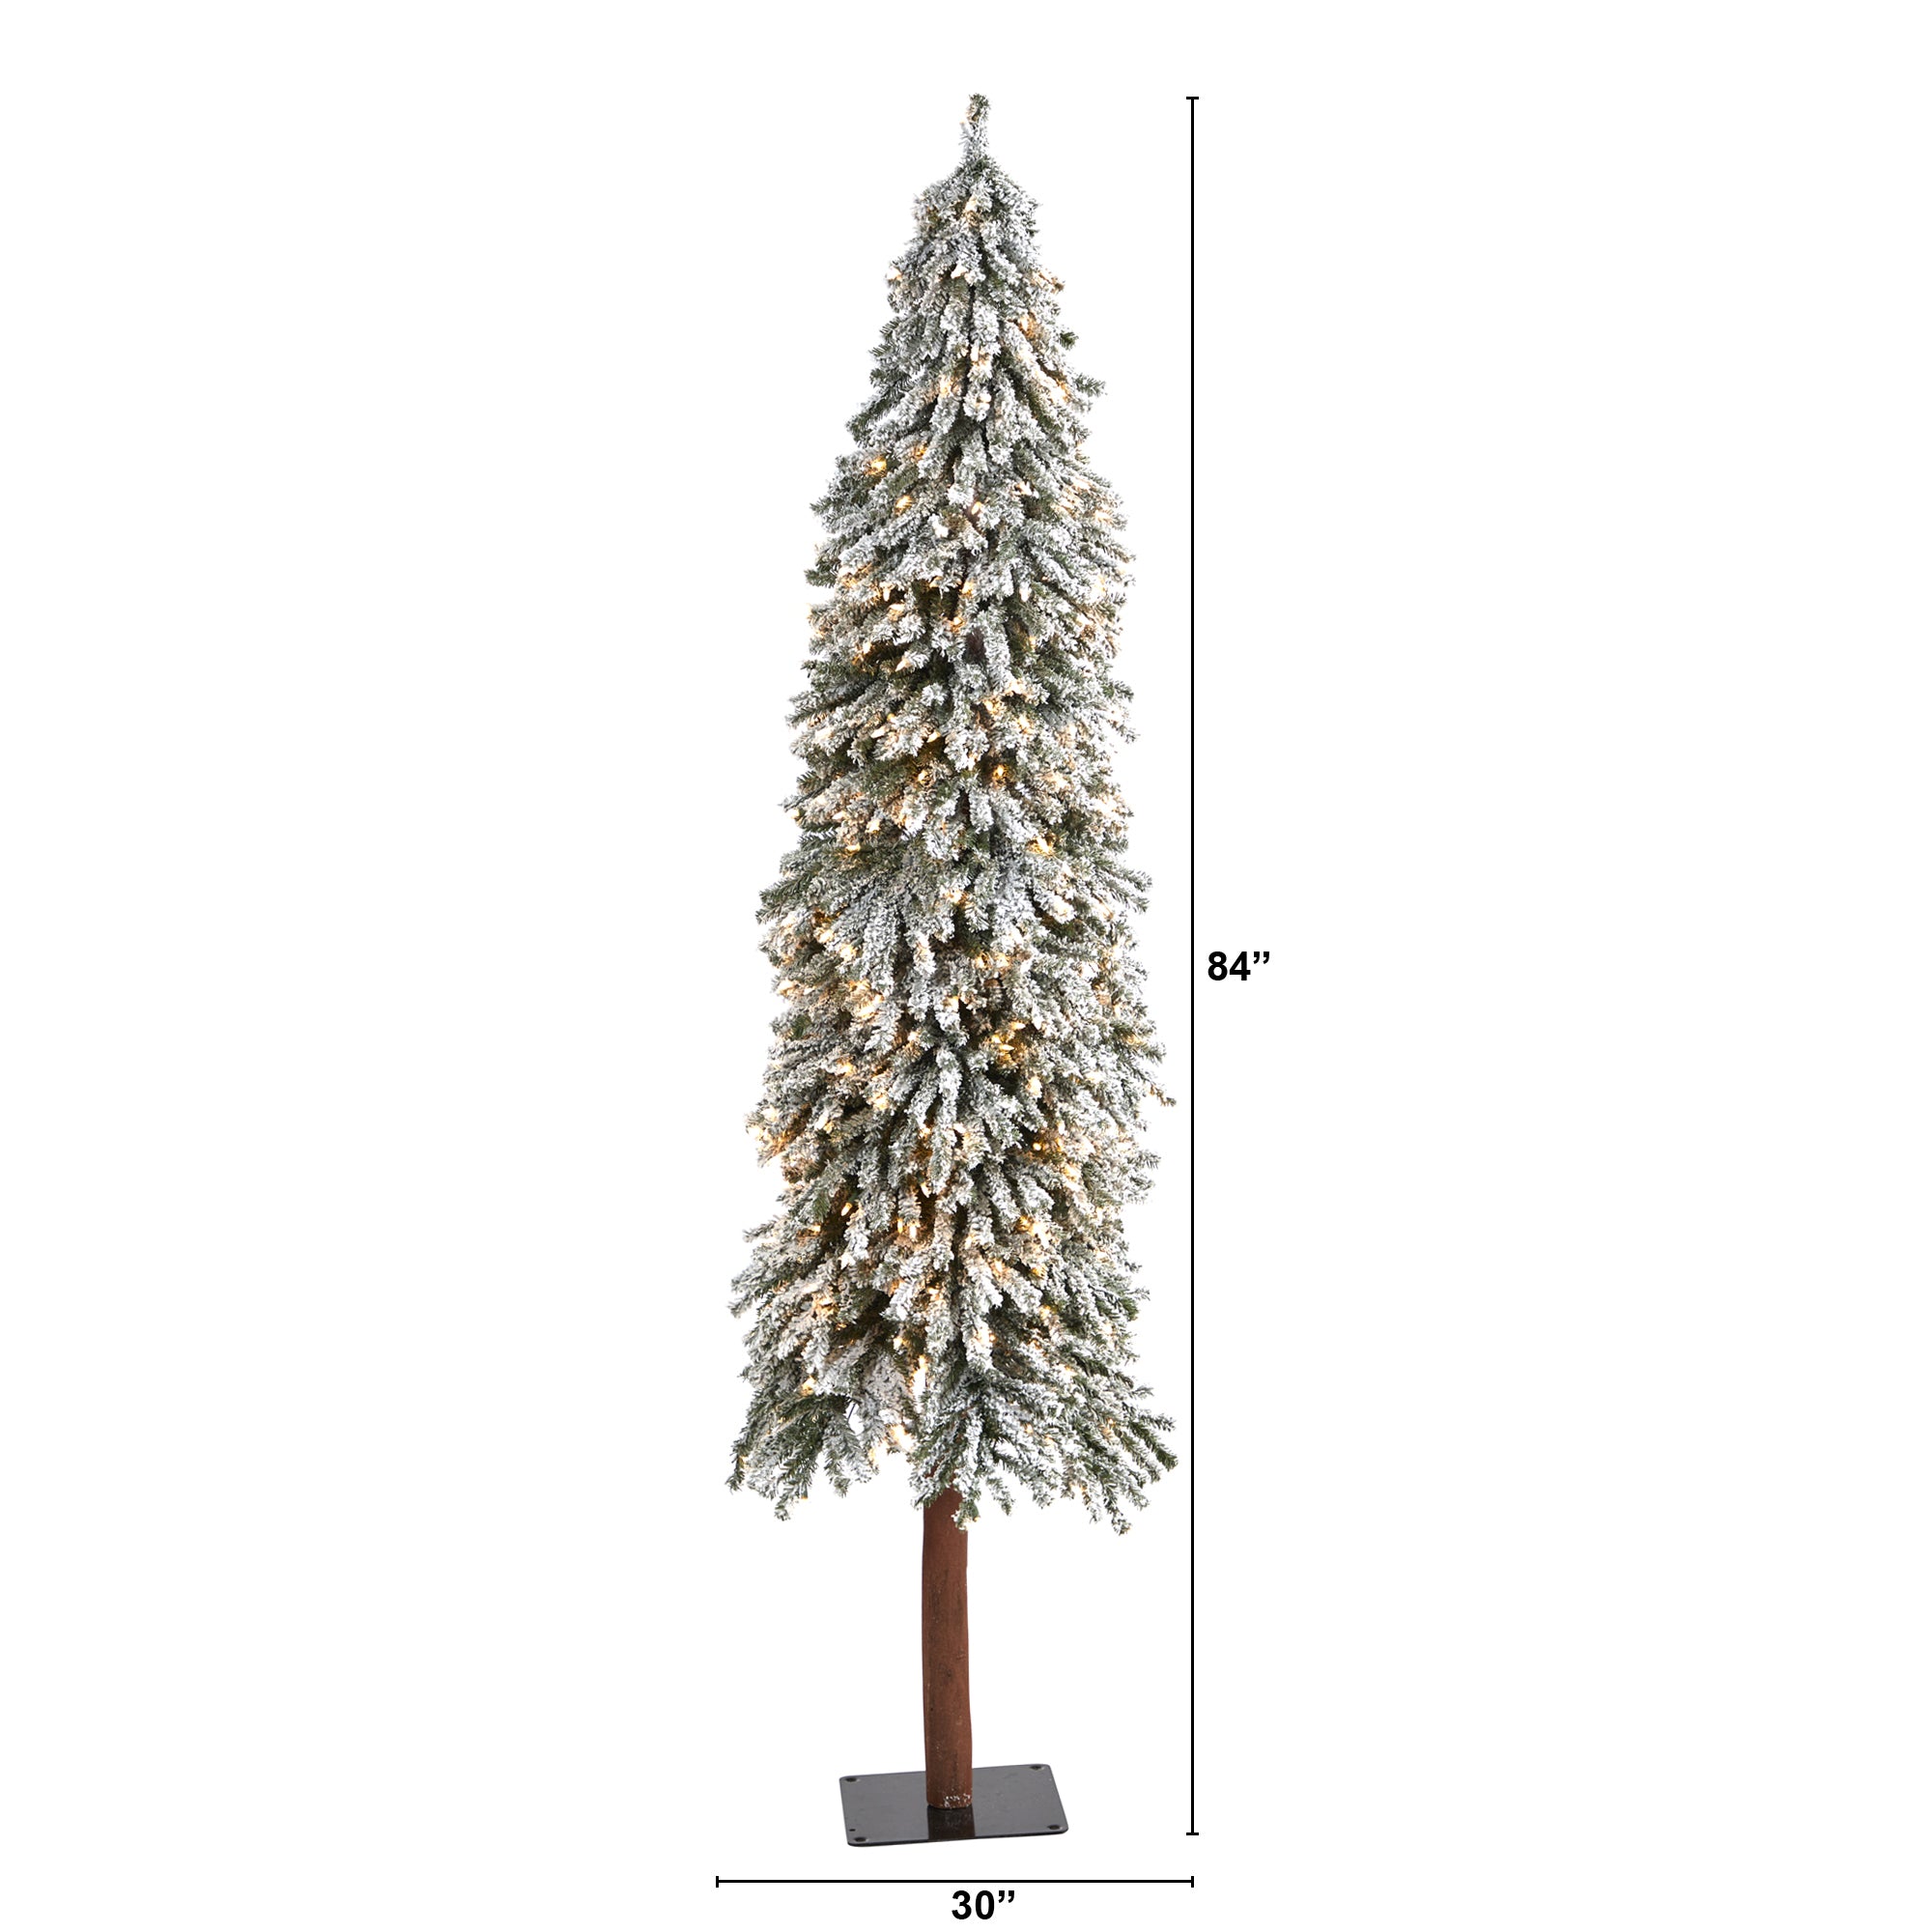 7' Flocked Grand Alpine Artificial Christmas Tree with 400 Clear Lights and 950 Bendable Branches on Natural Trunk